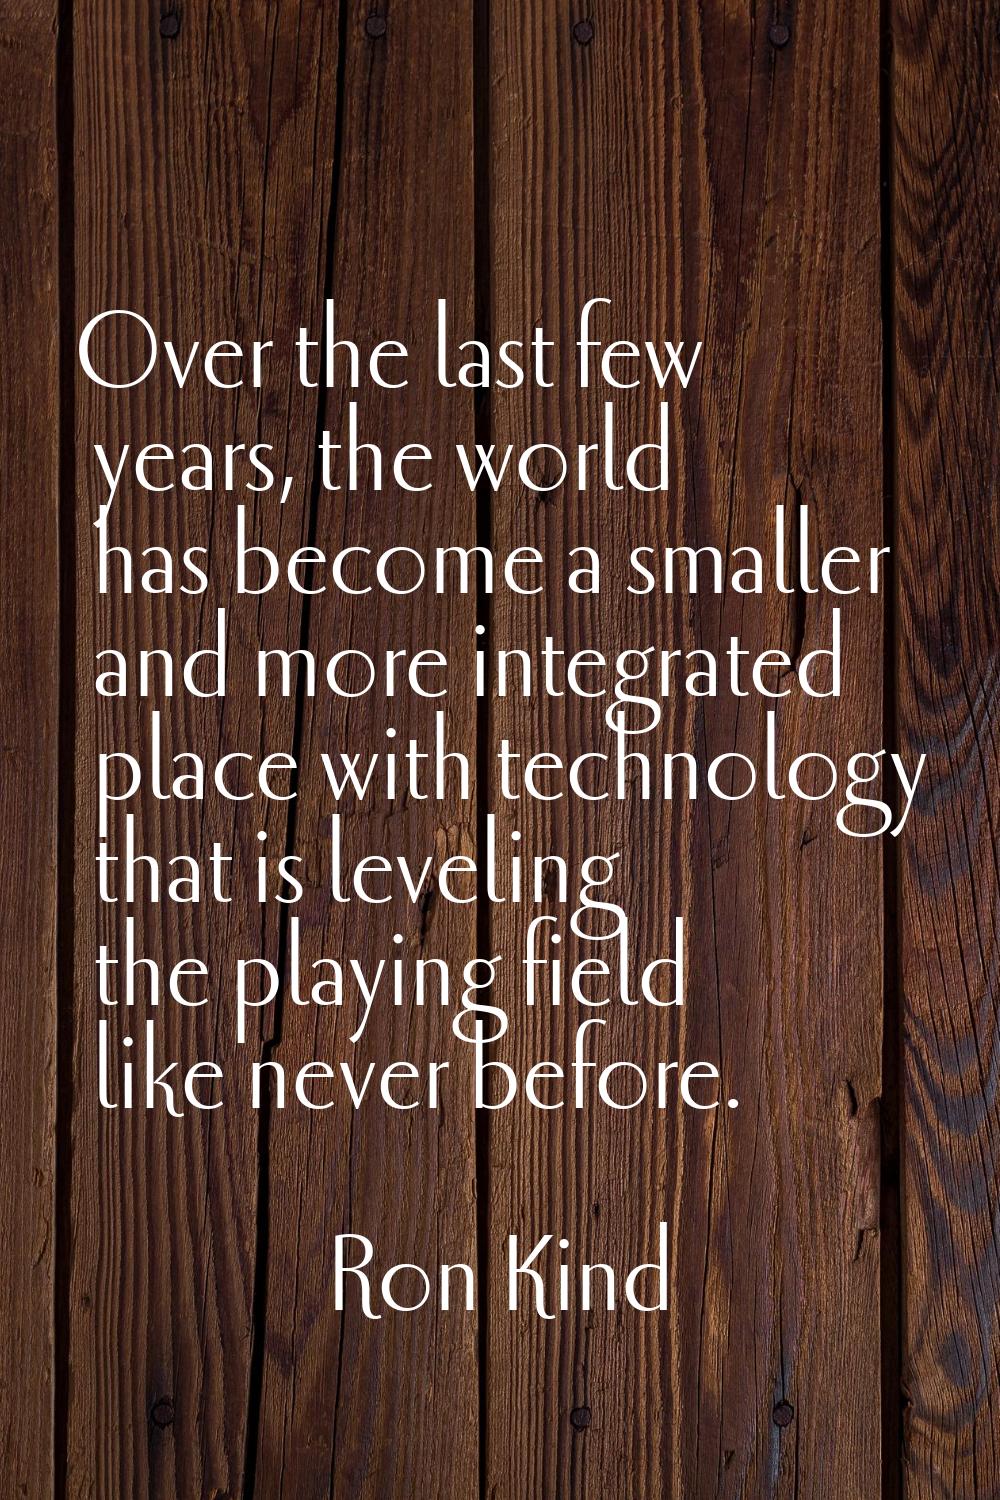 Over the last few years, the world has become a smaller and more integrated place with technology t